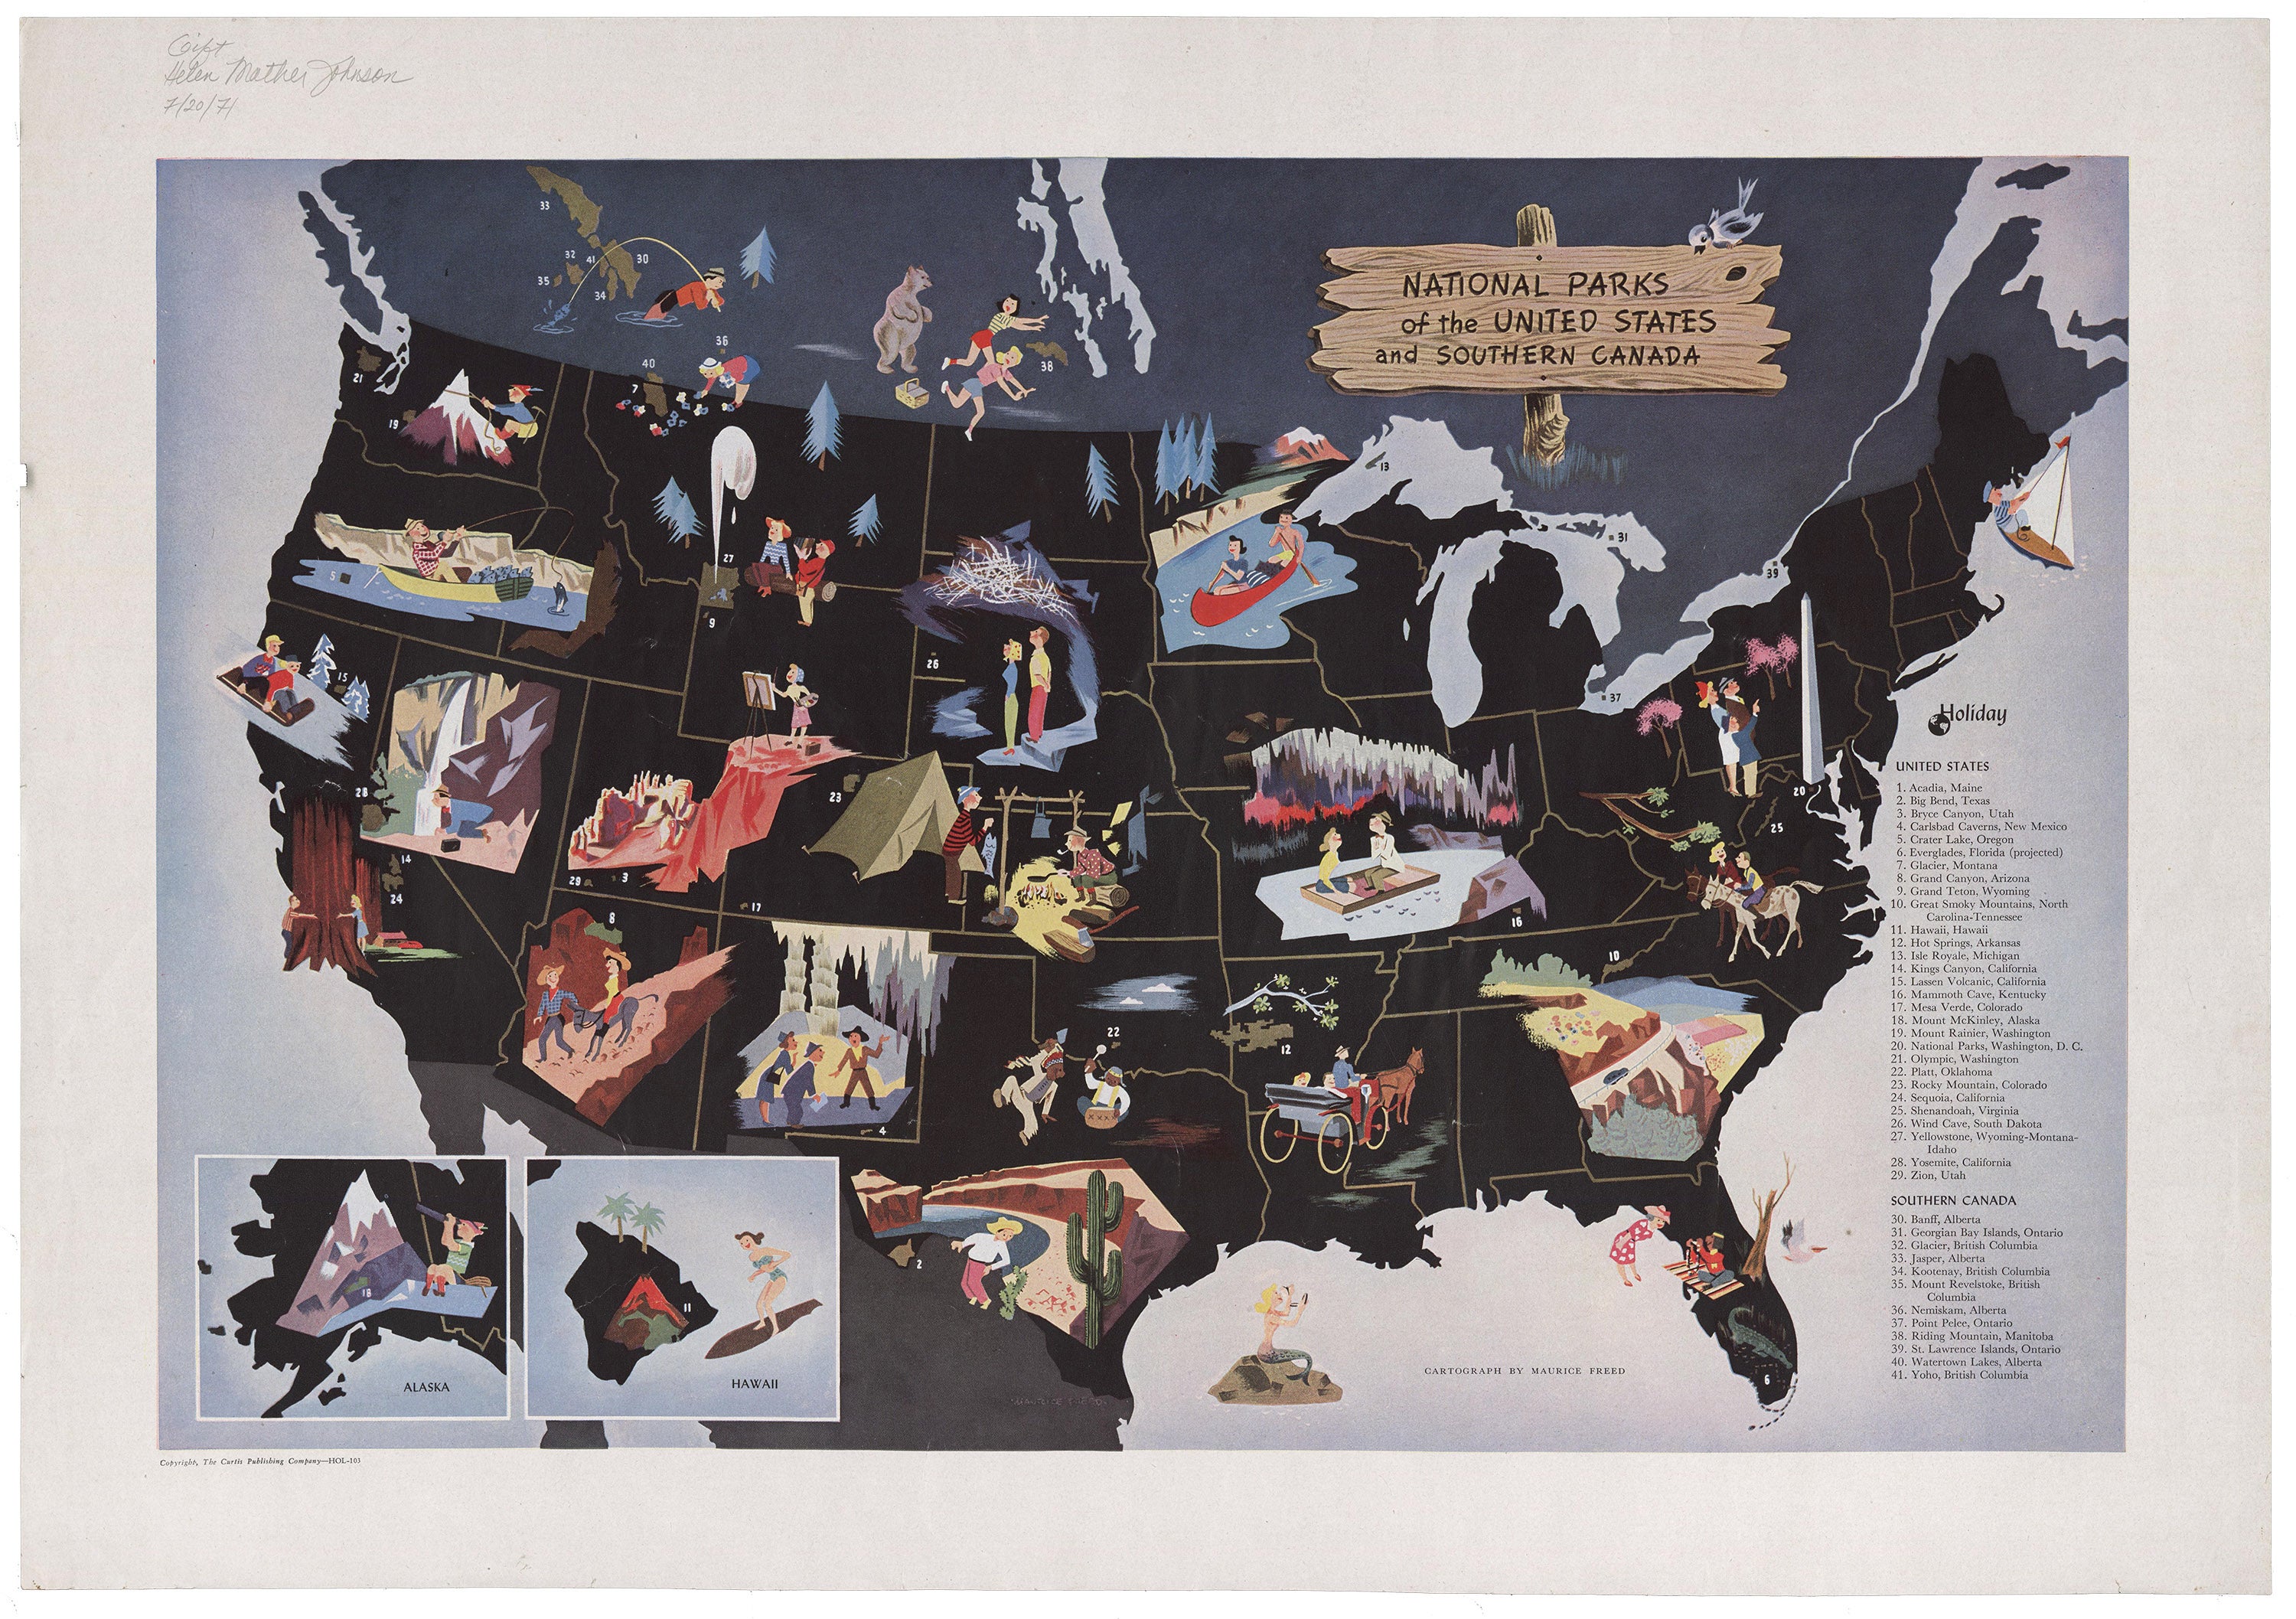 A pictorial map of Southern Canada and United States National Parks in the 1950s.